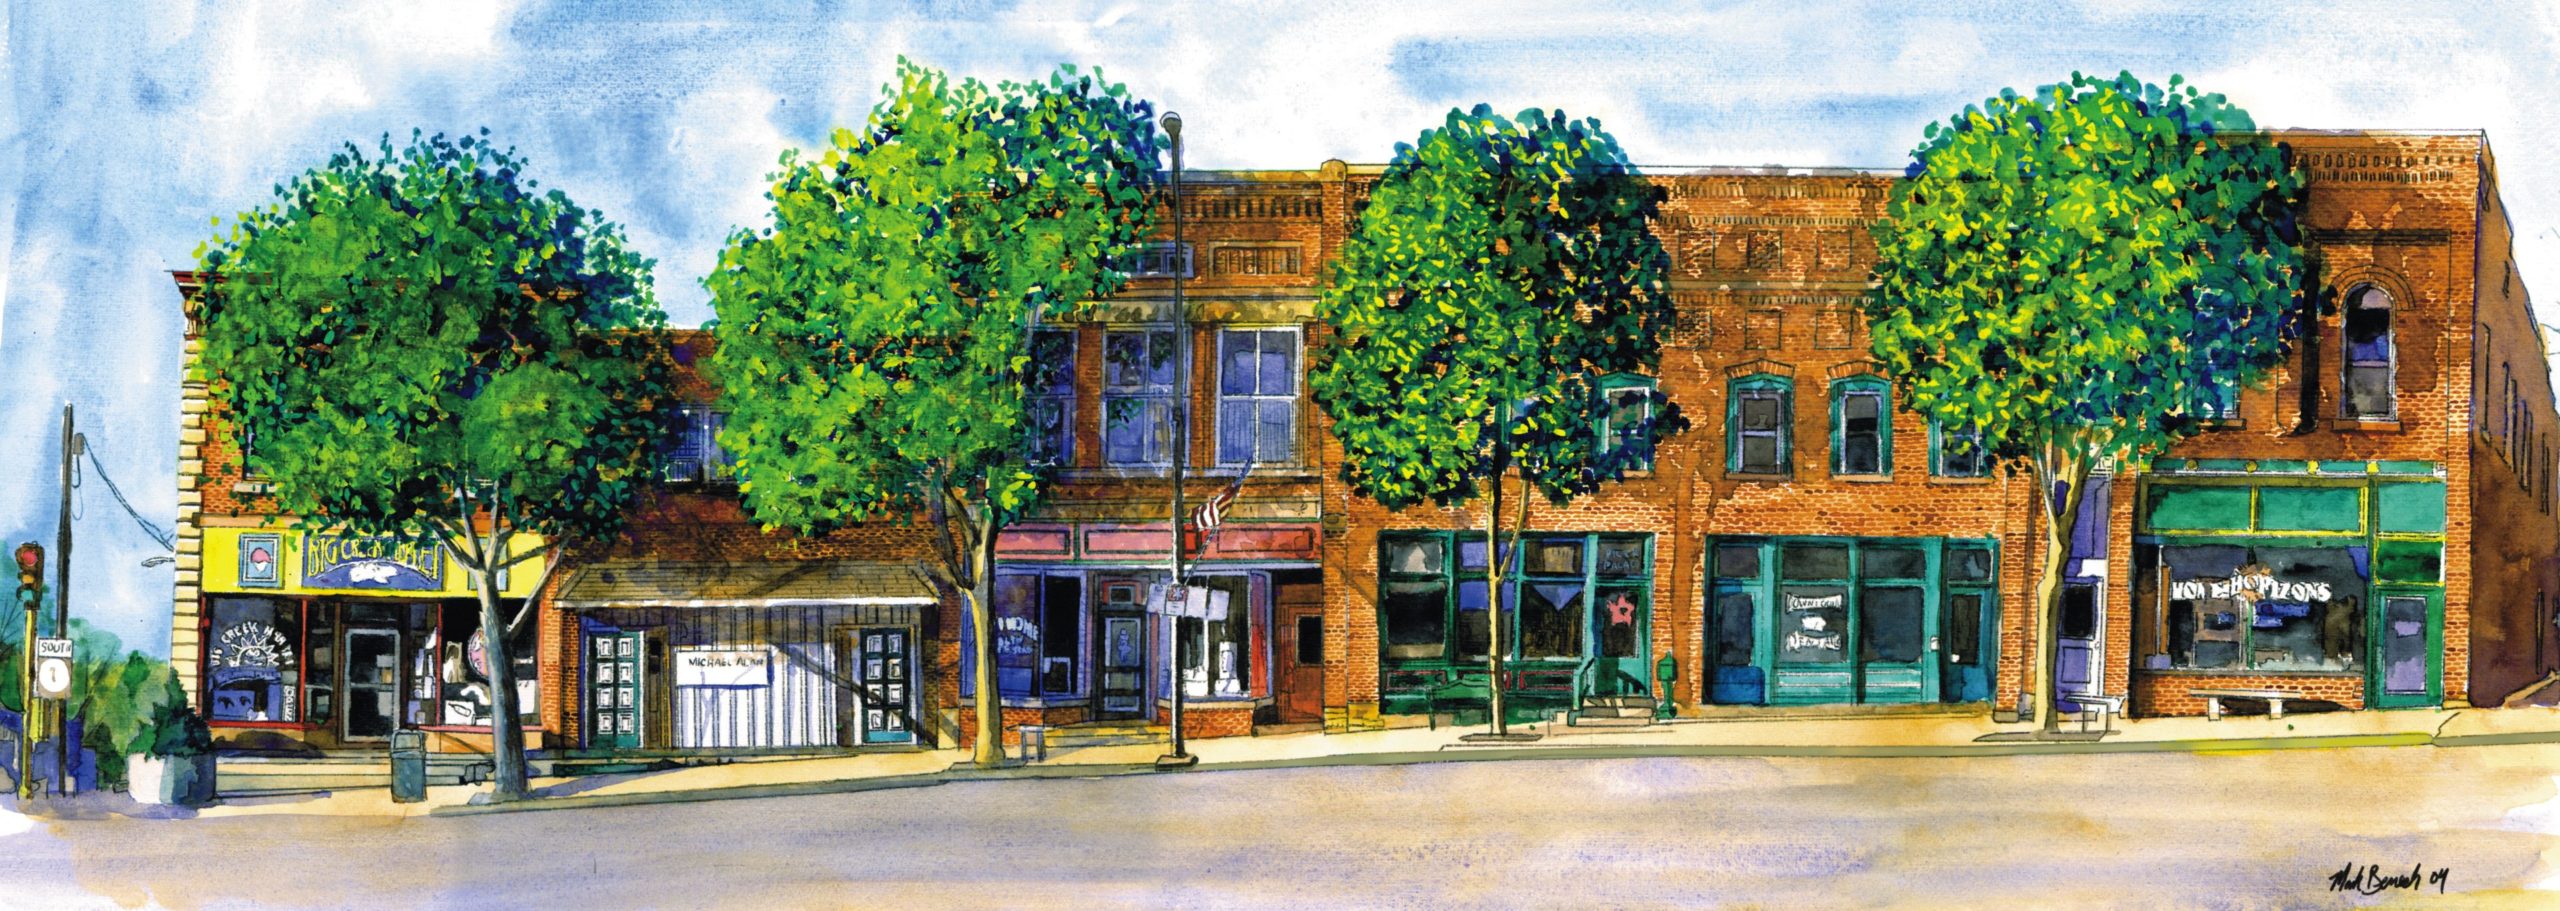 Photo of Painting of Downtown Southside Sun Newspaper by Mark Benesh